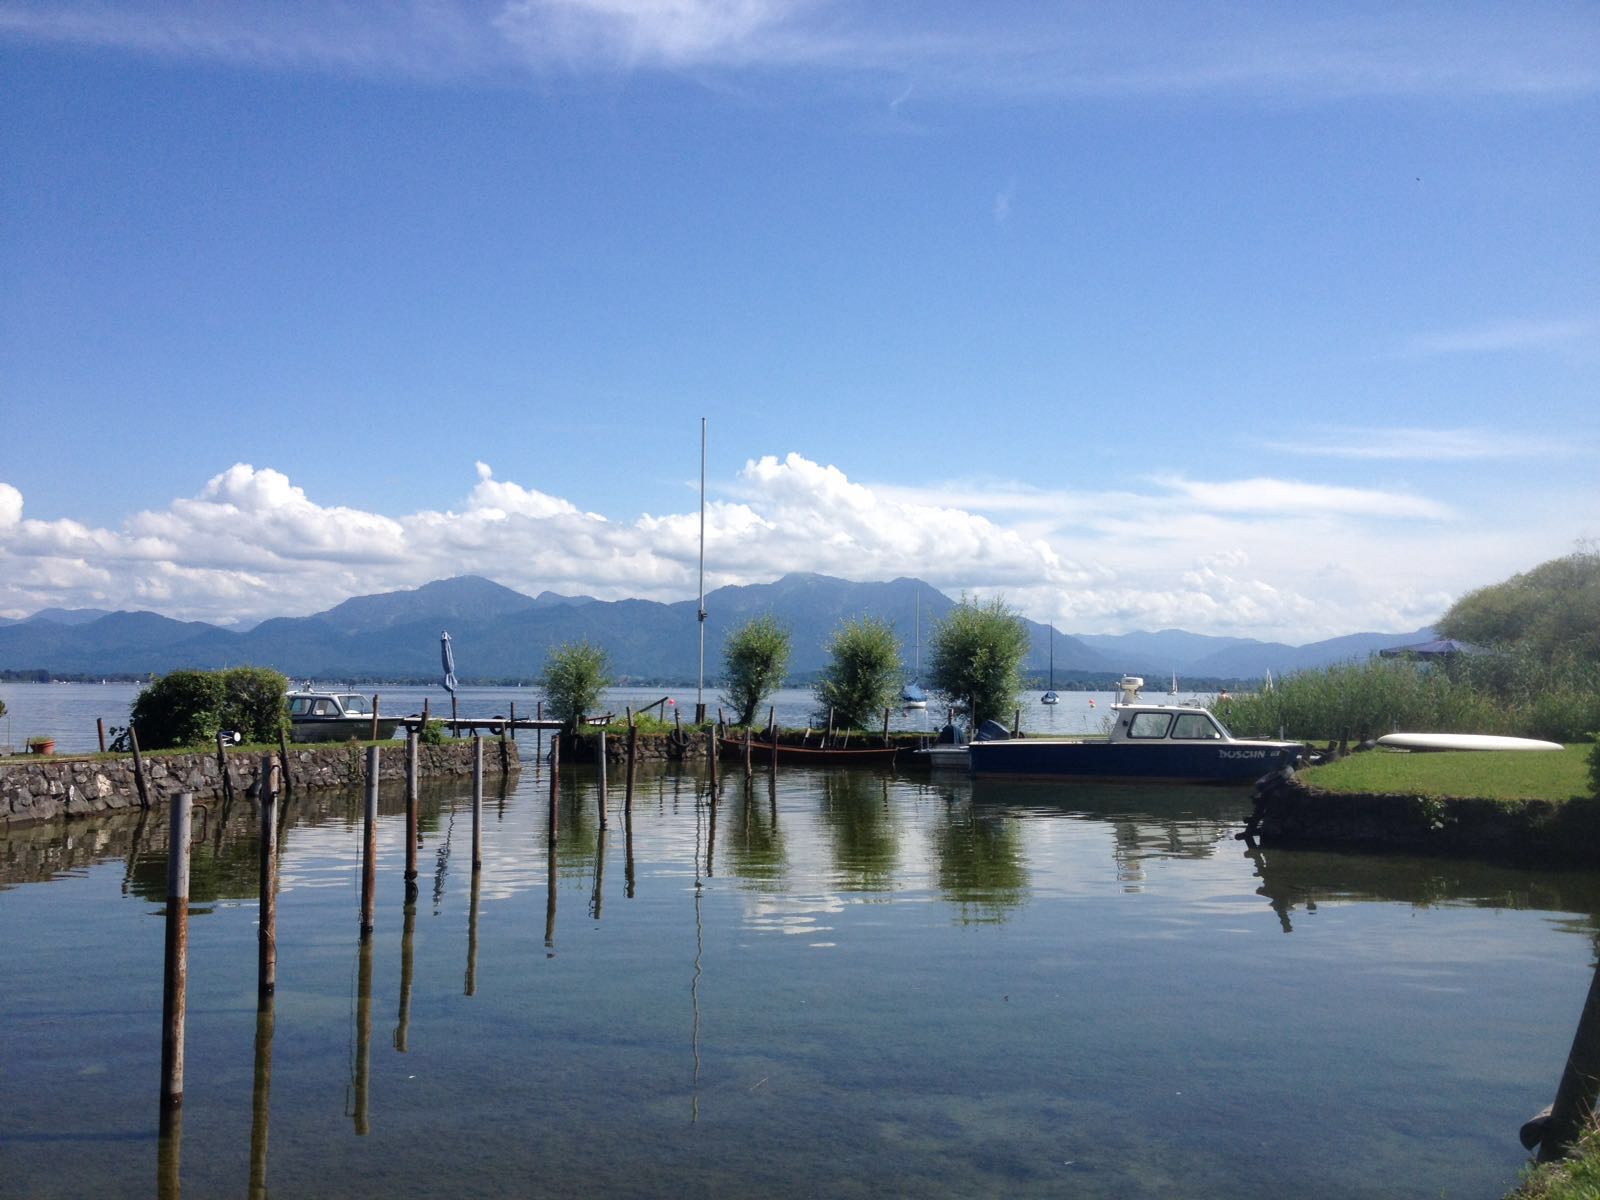 Beautiful scenery of Lake Chiemsee from Herreninsel, overlooking the lake and the Alps